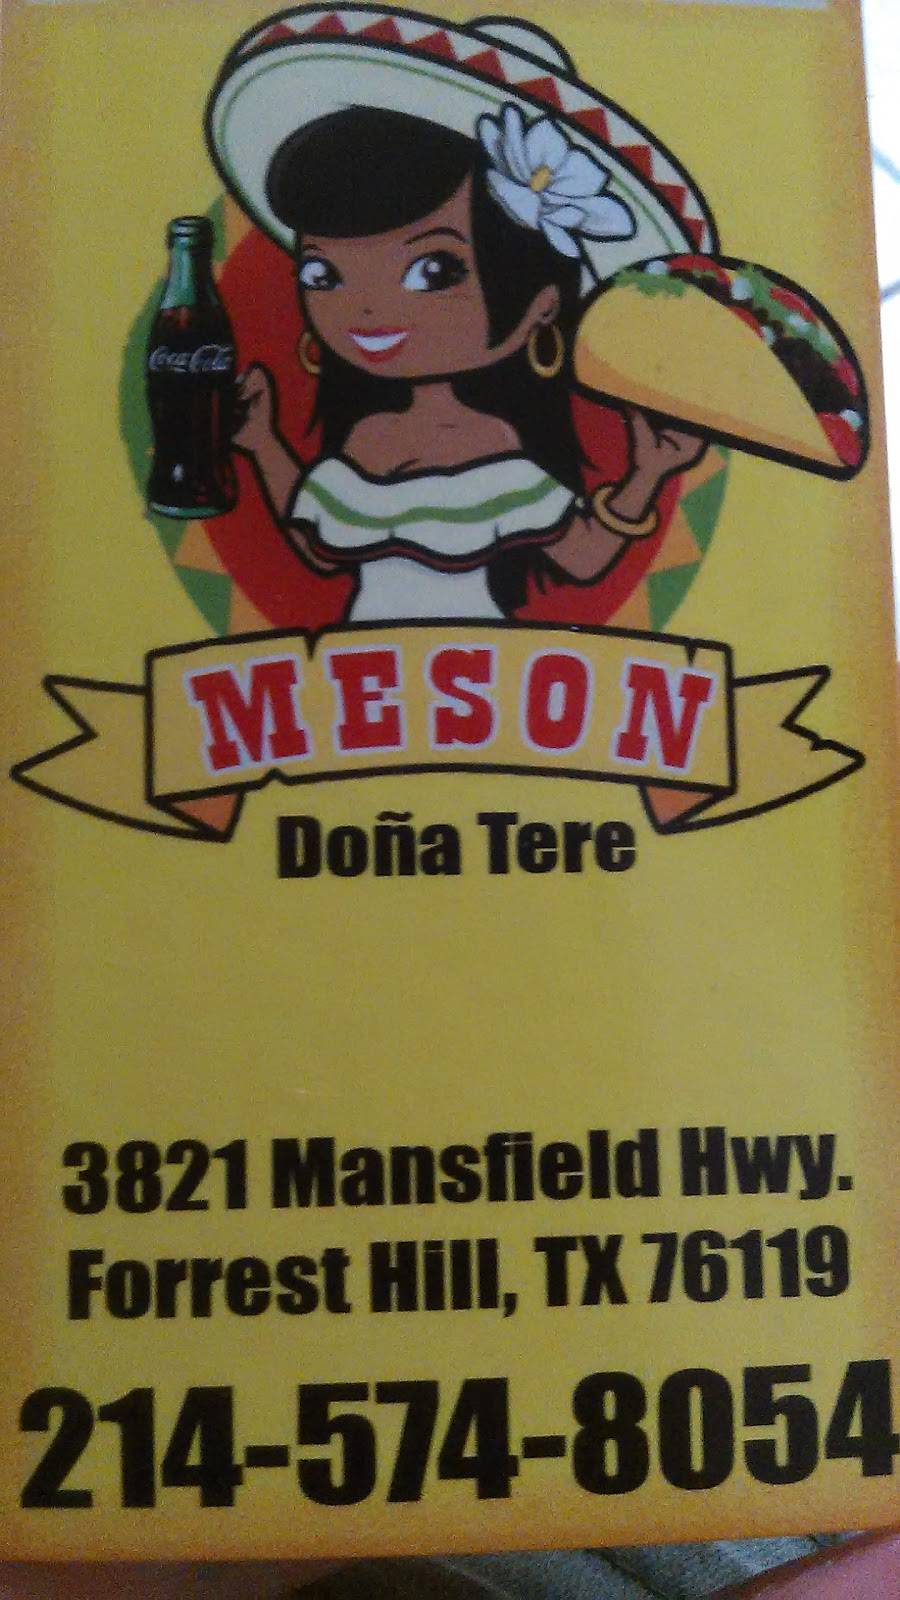 El Meson De Doña Tere | 3821 Mansfield Hwy, Forest Hill, TX 76119 | Phone: (214) 574-8054